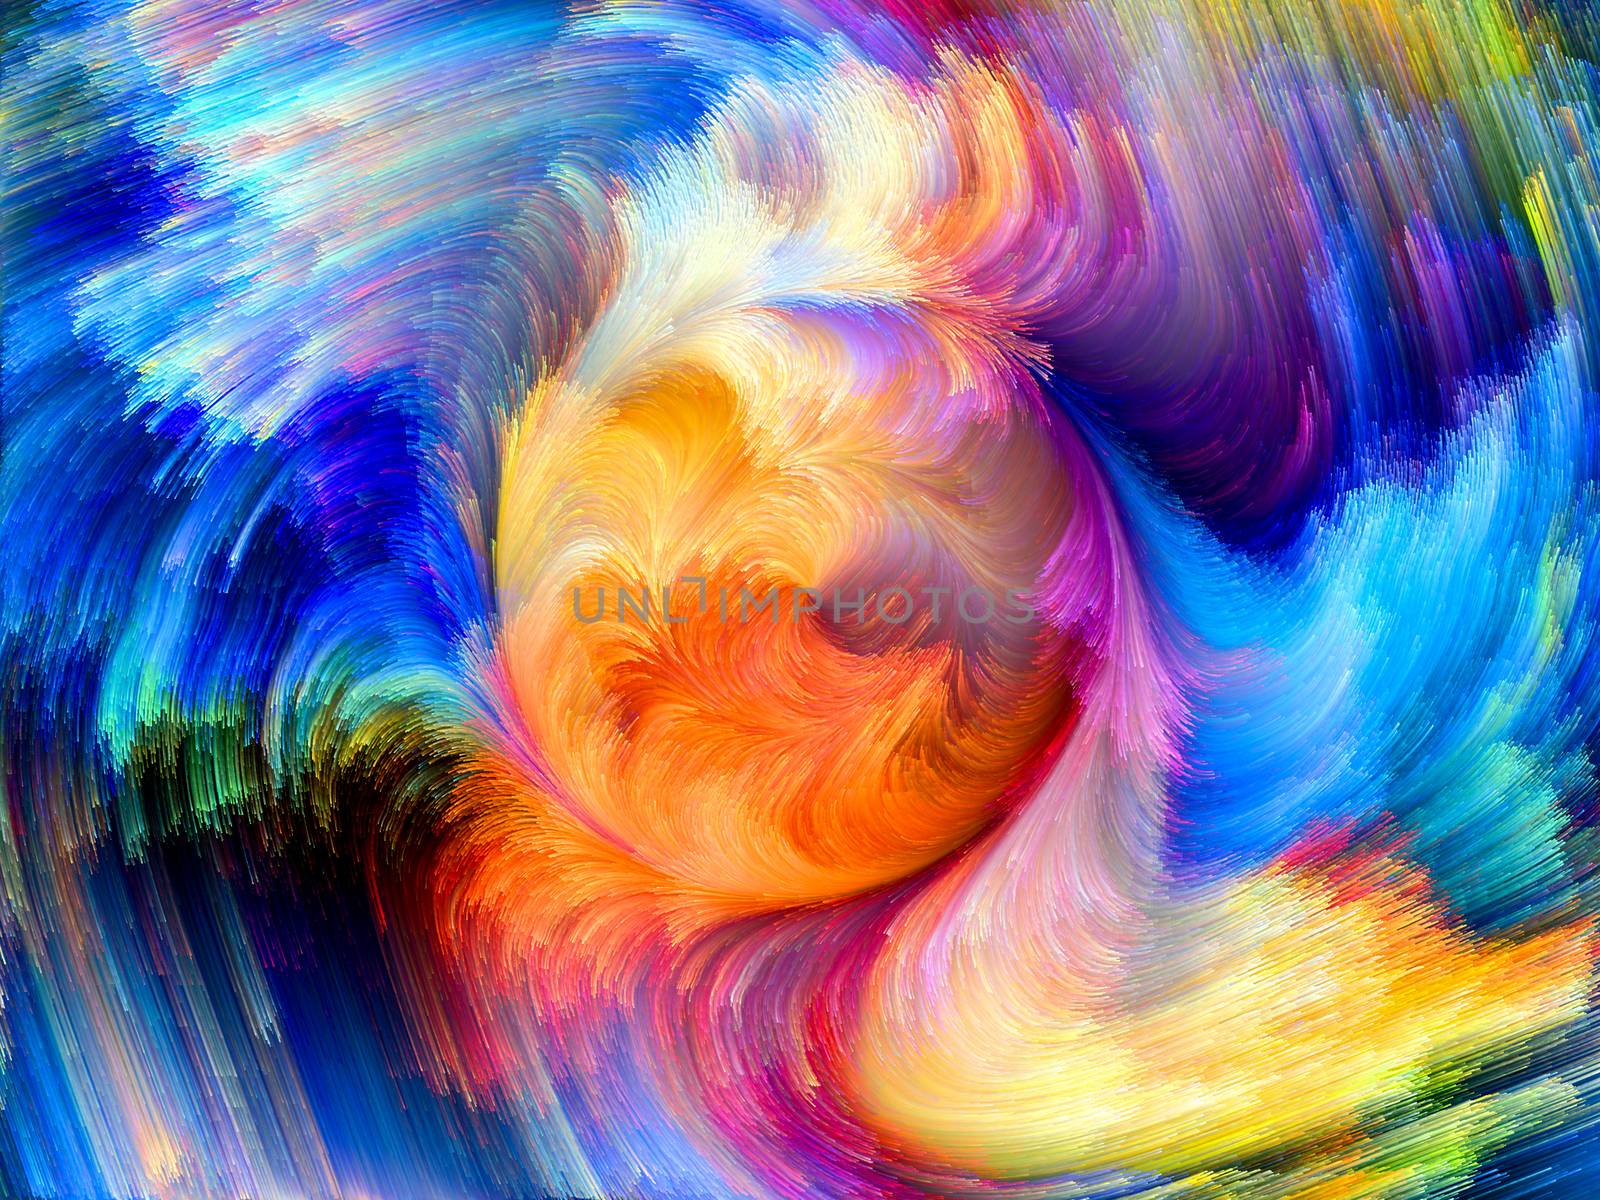 Colors In Bloom series. Artistic abstraction composed of fractal color textures on the subject of imagination, creativity and design